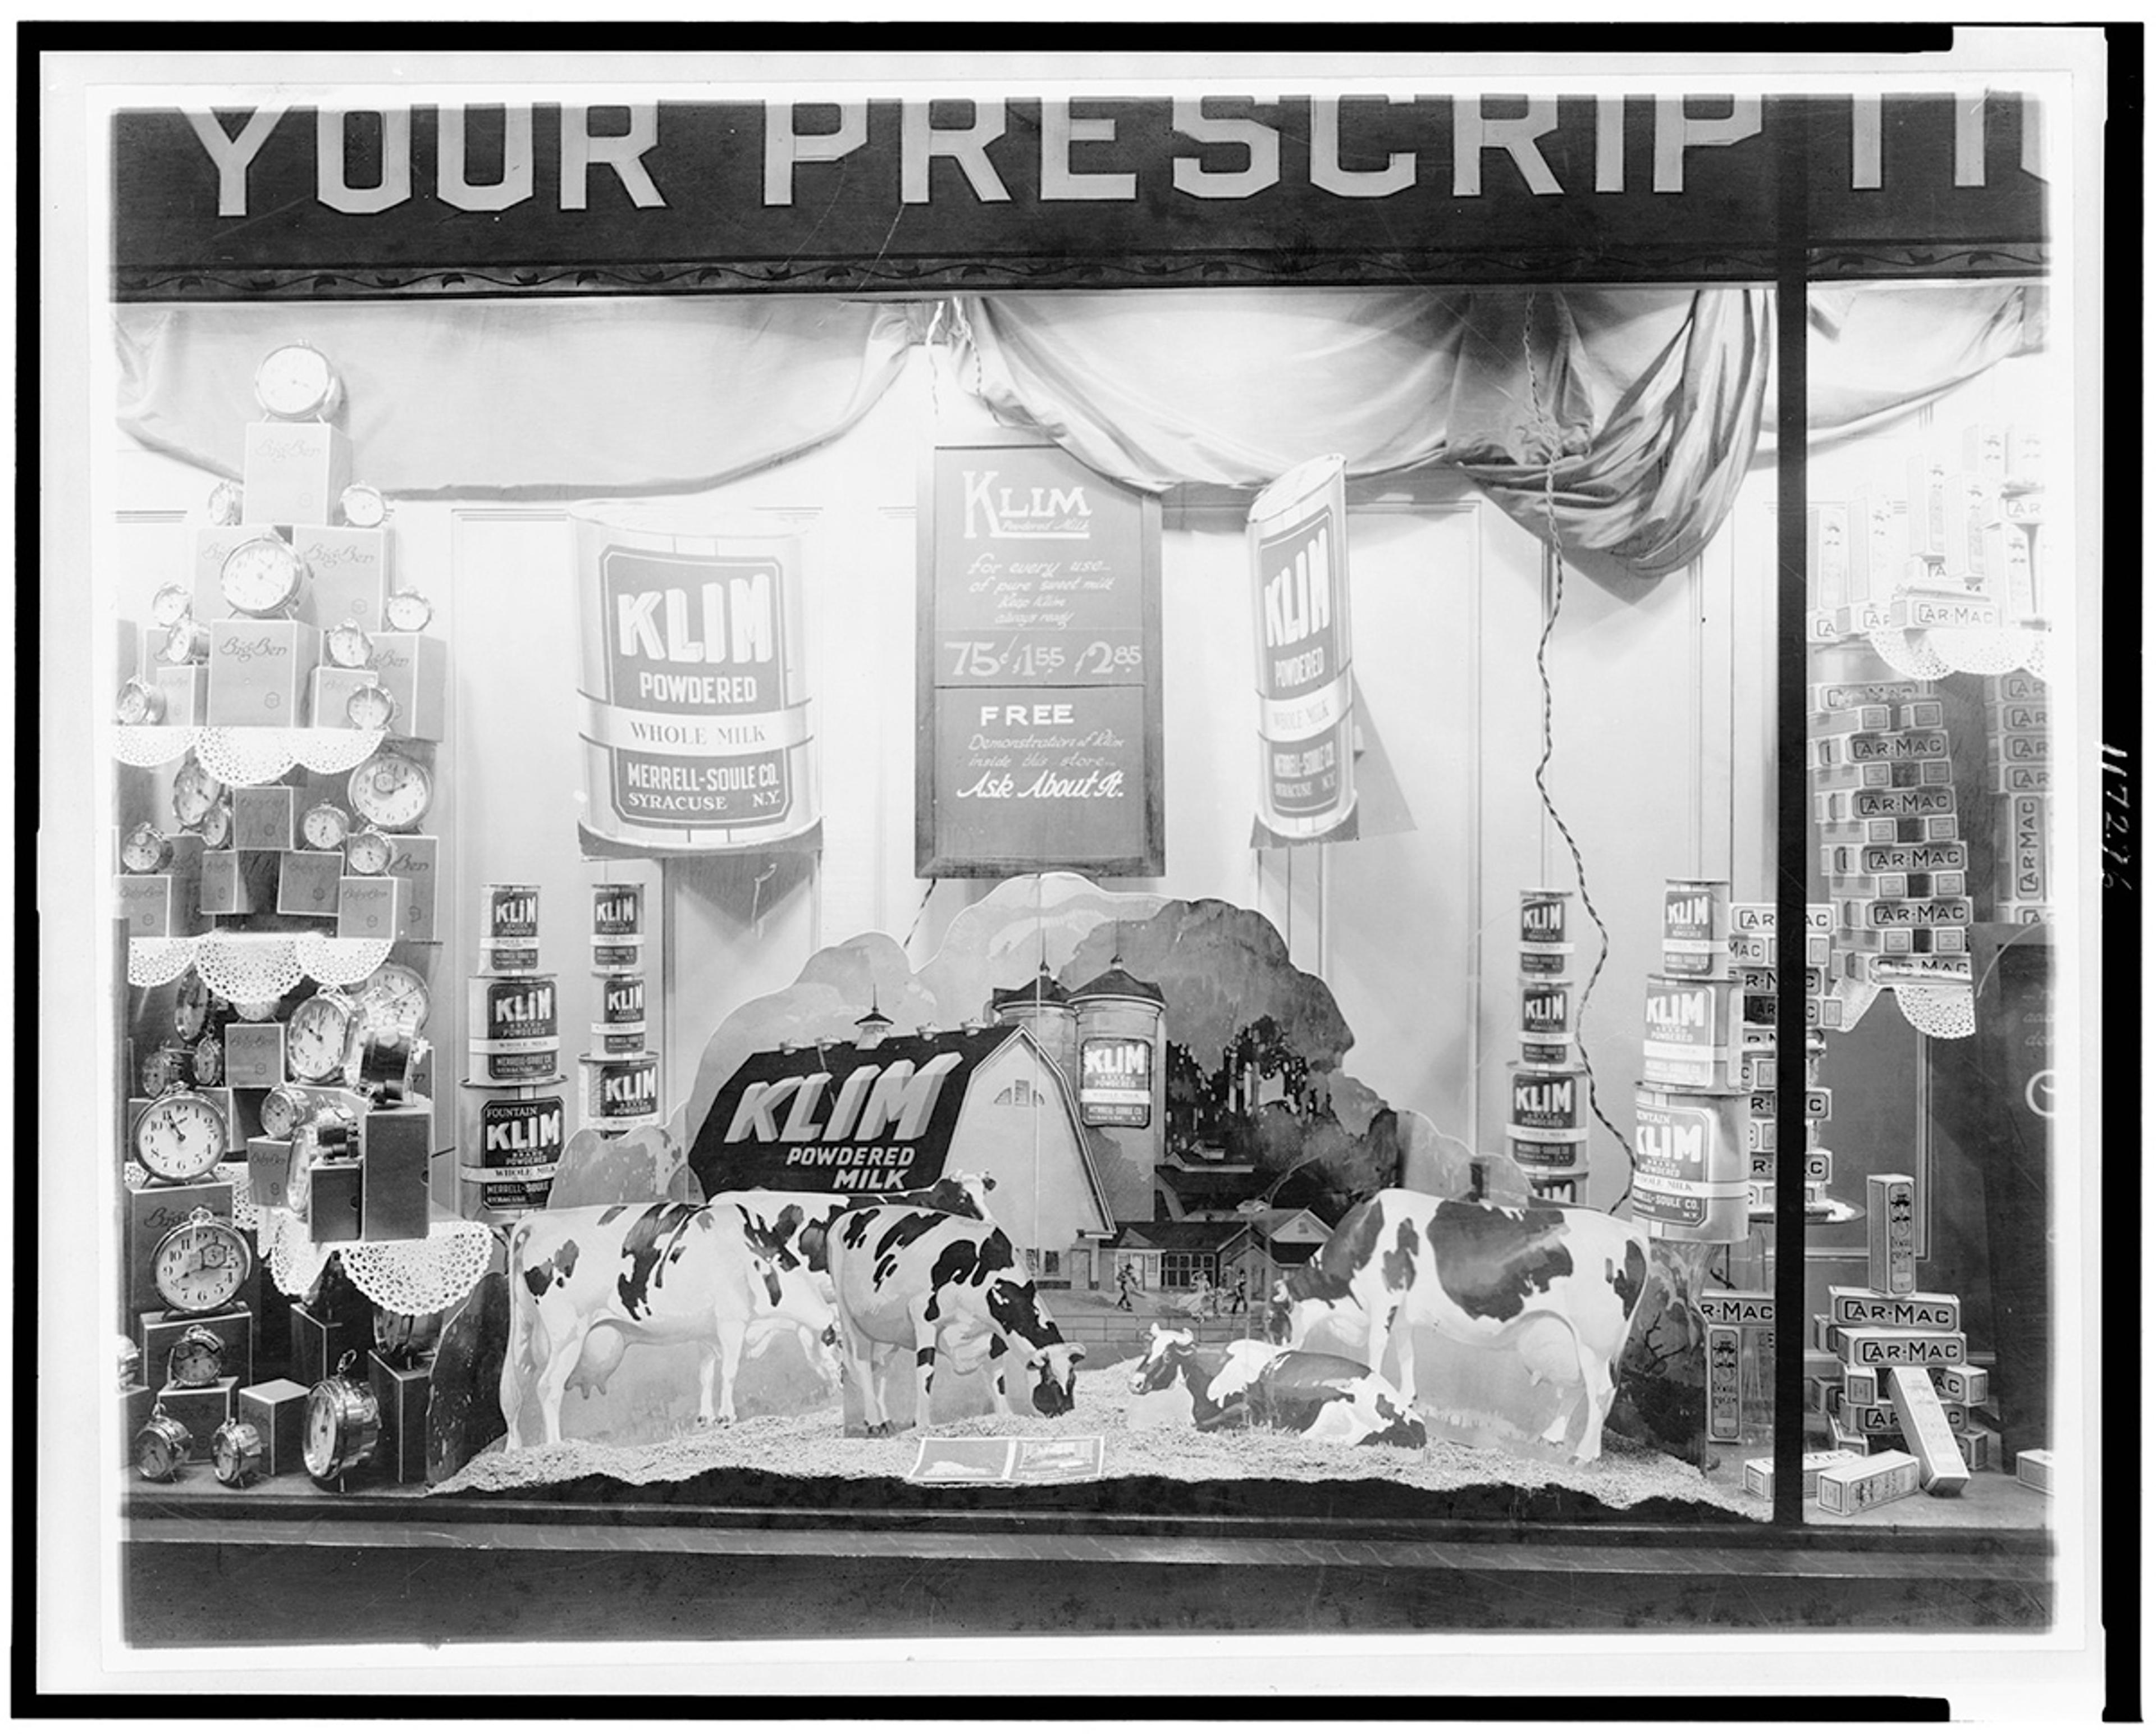 A black and white photo of an early 20th century drugstore display showing model cows and a miniature farm with signs for Klim powdered milk.